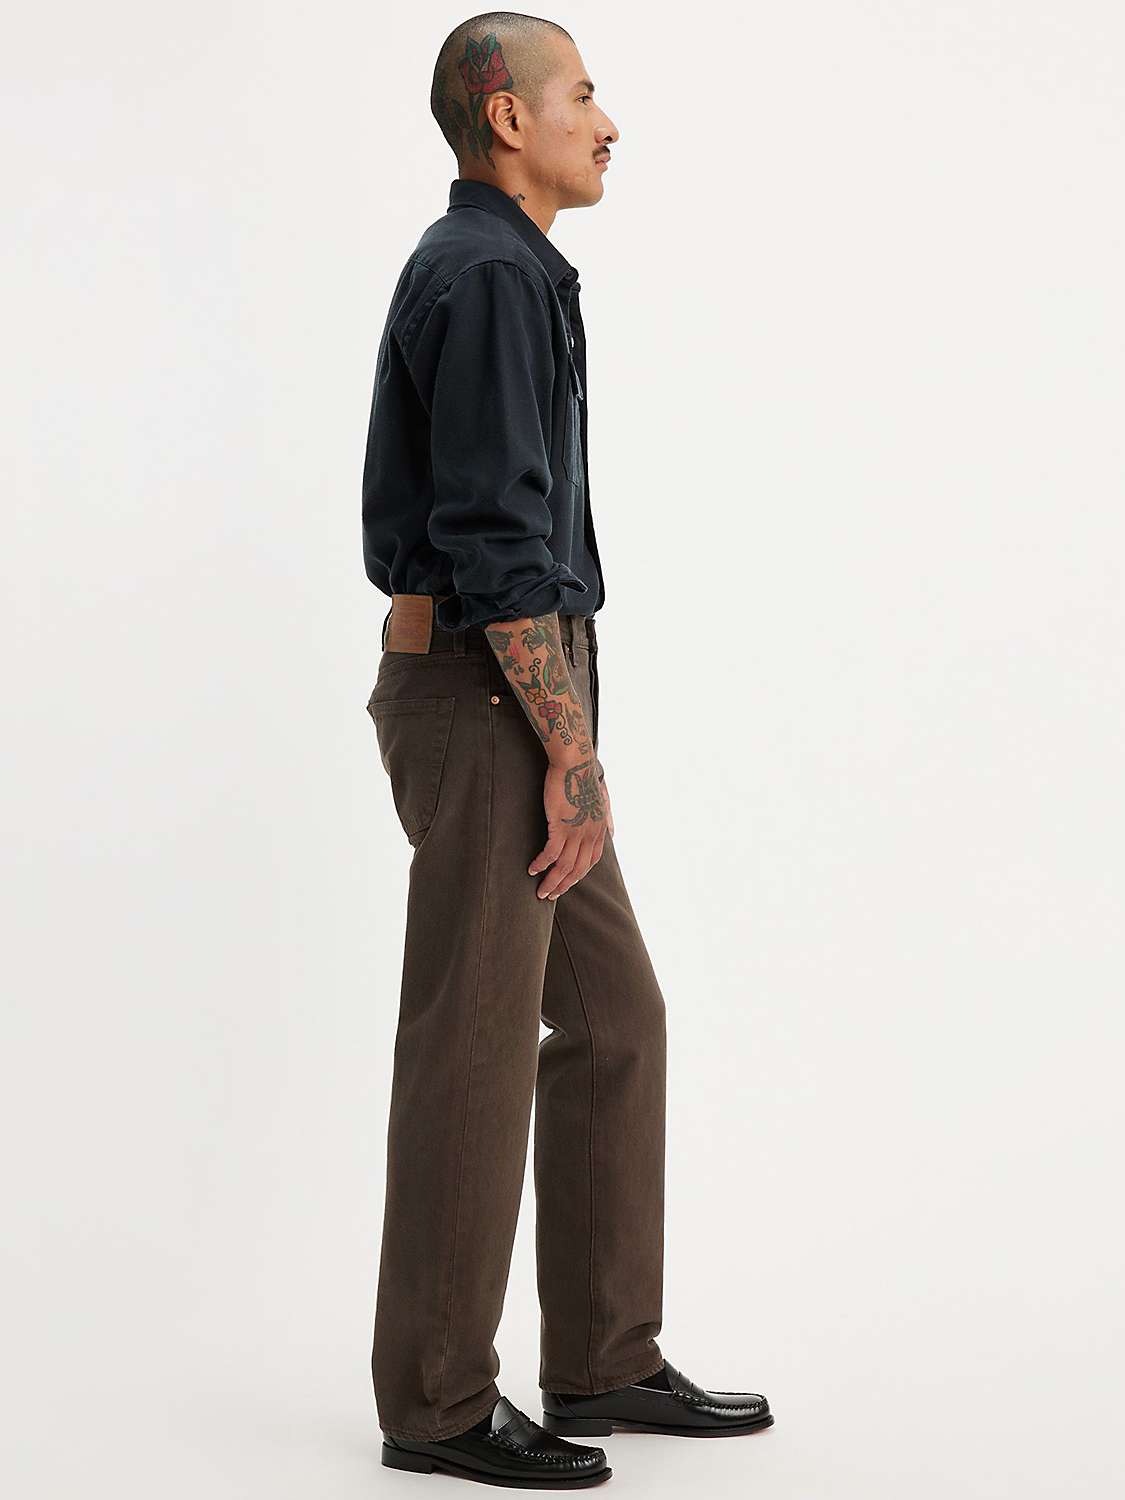 Buy Levi's 501 Original Straight Jeans, Brown Chocolate Online at johnlewis.com